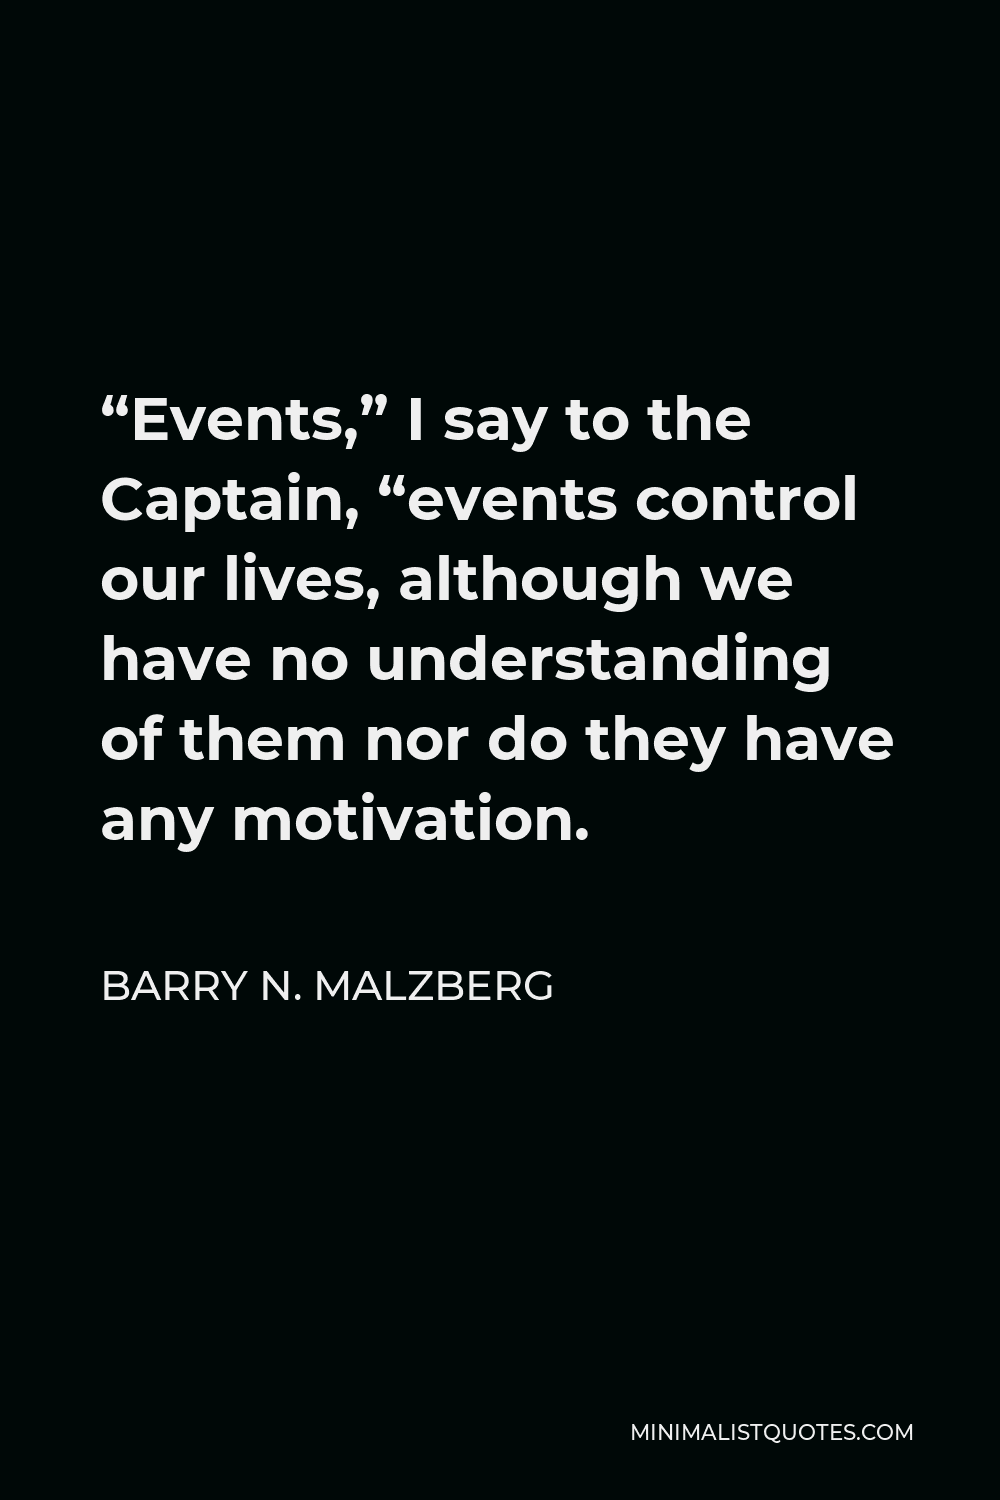 Barry N. Malzberg Quote - “Events,” I say to the Captain, “events control our lives, although we have no understanding of them nor do they have any motivation.